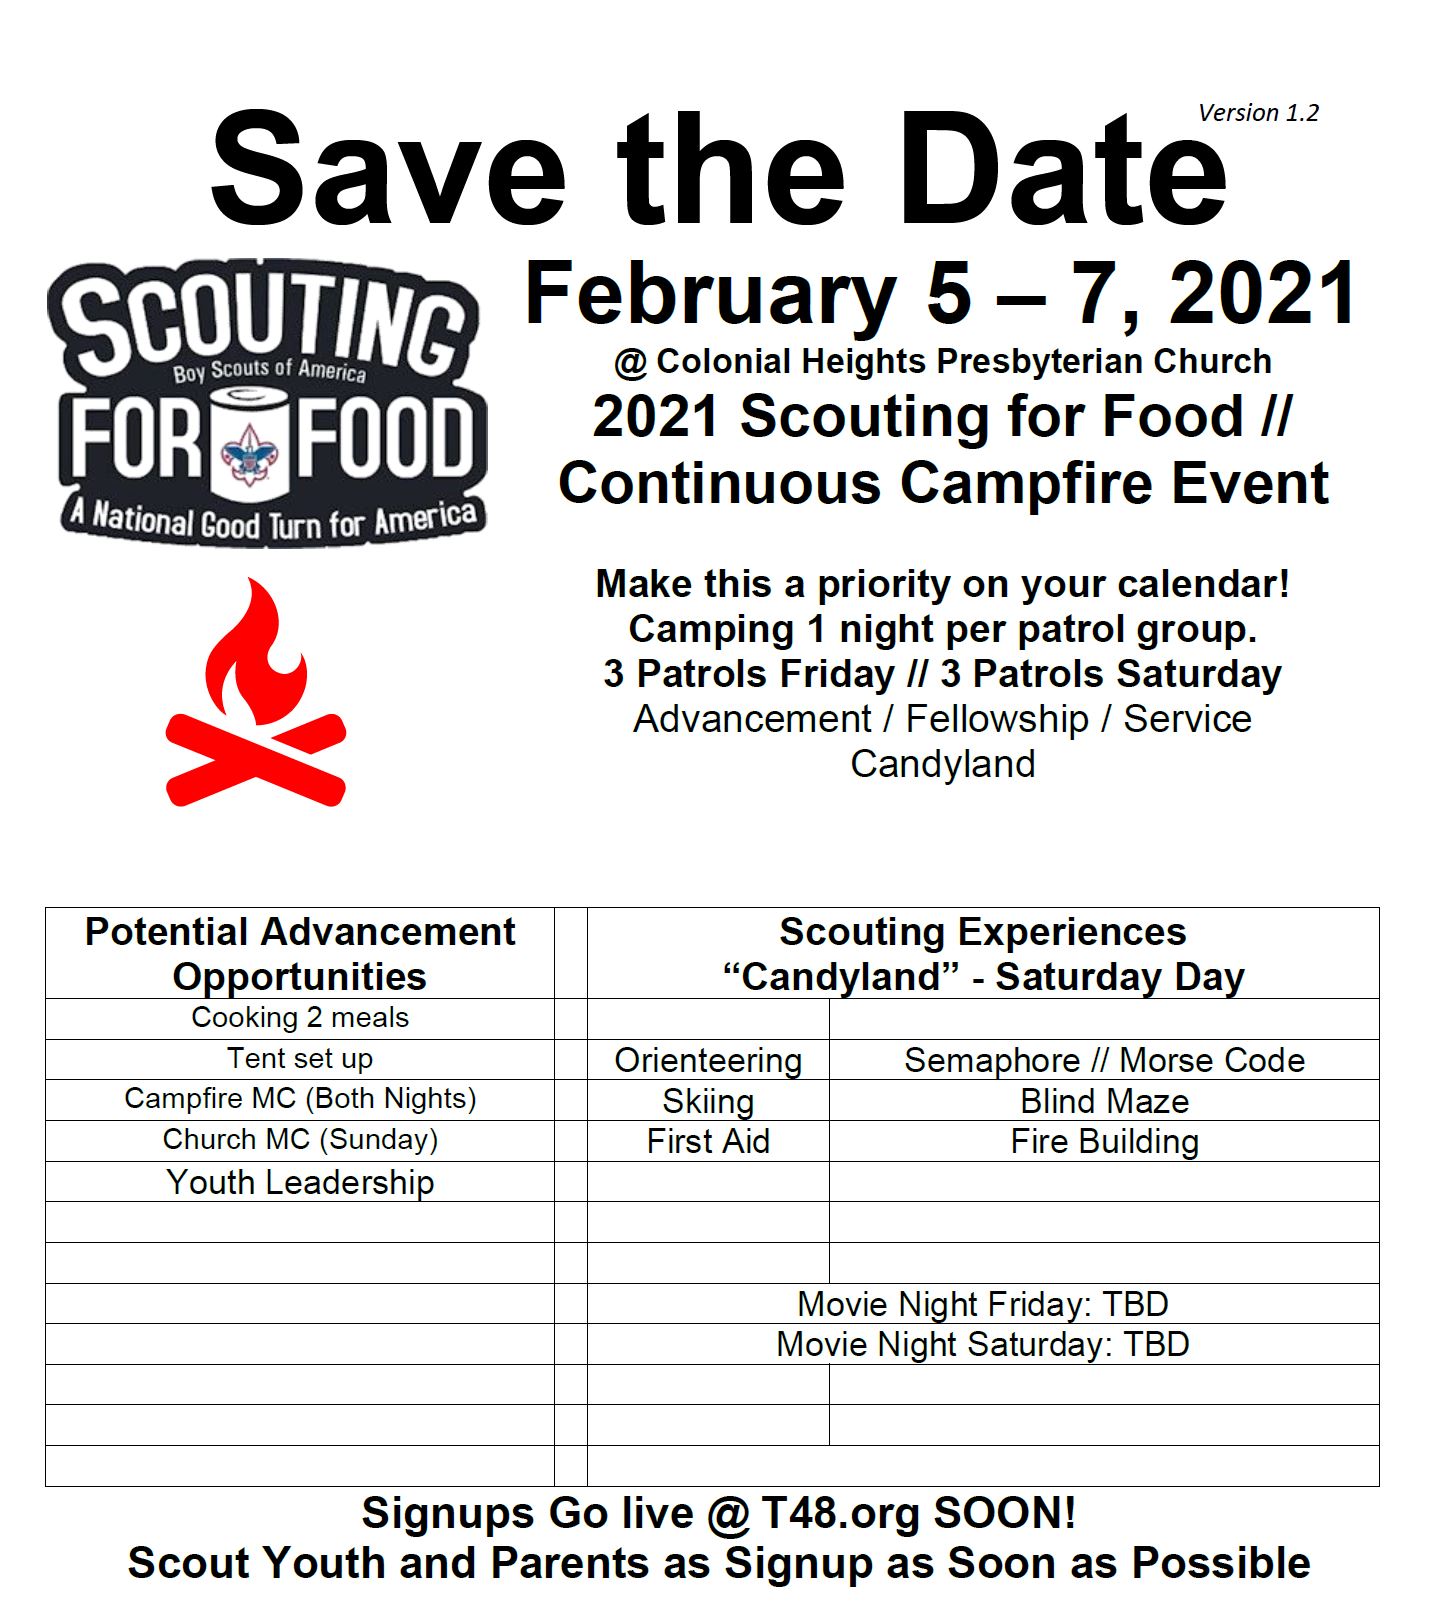 2021 Scouting for Food // Continuous Campfire Event